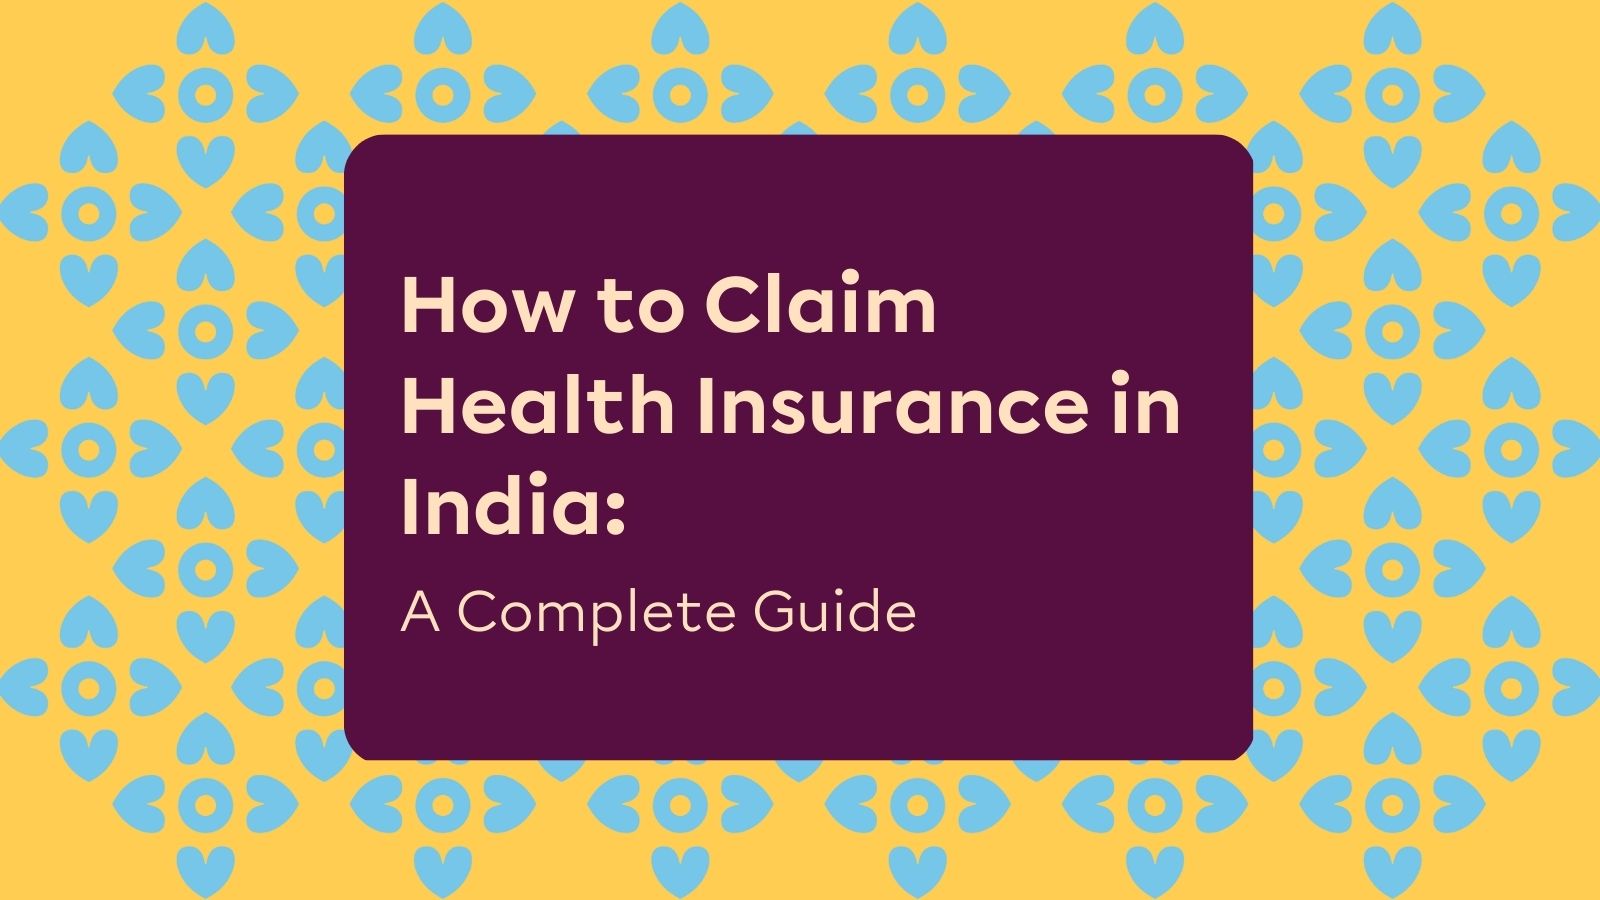 how-to-claim-health-insurance-in-india-a-complete-guide-plum-blog